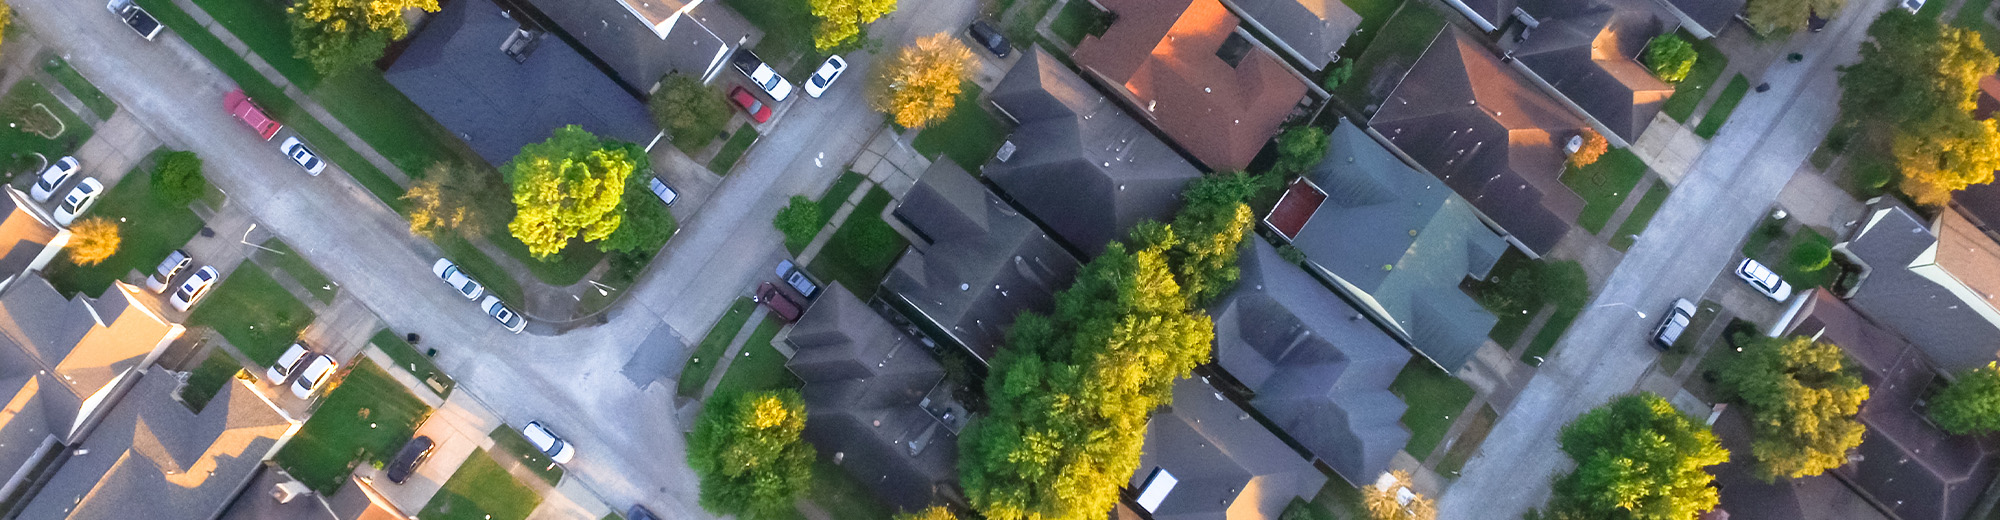 Residential house aerial